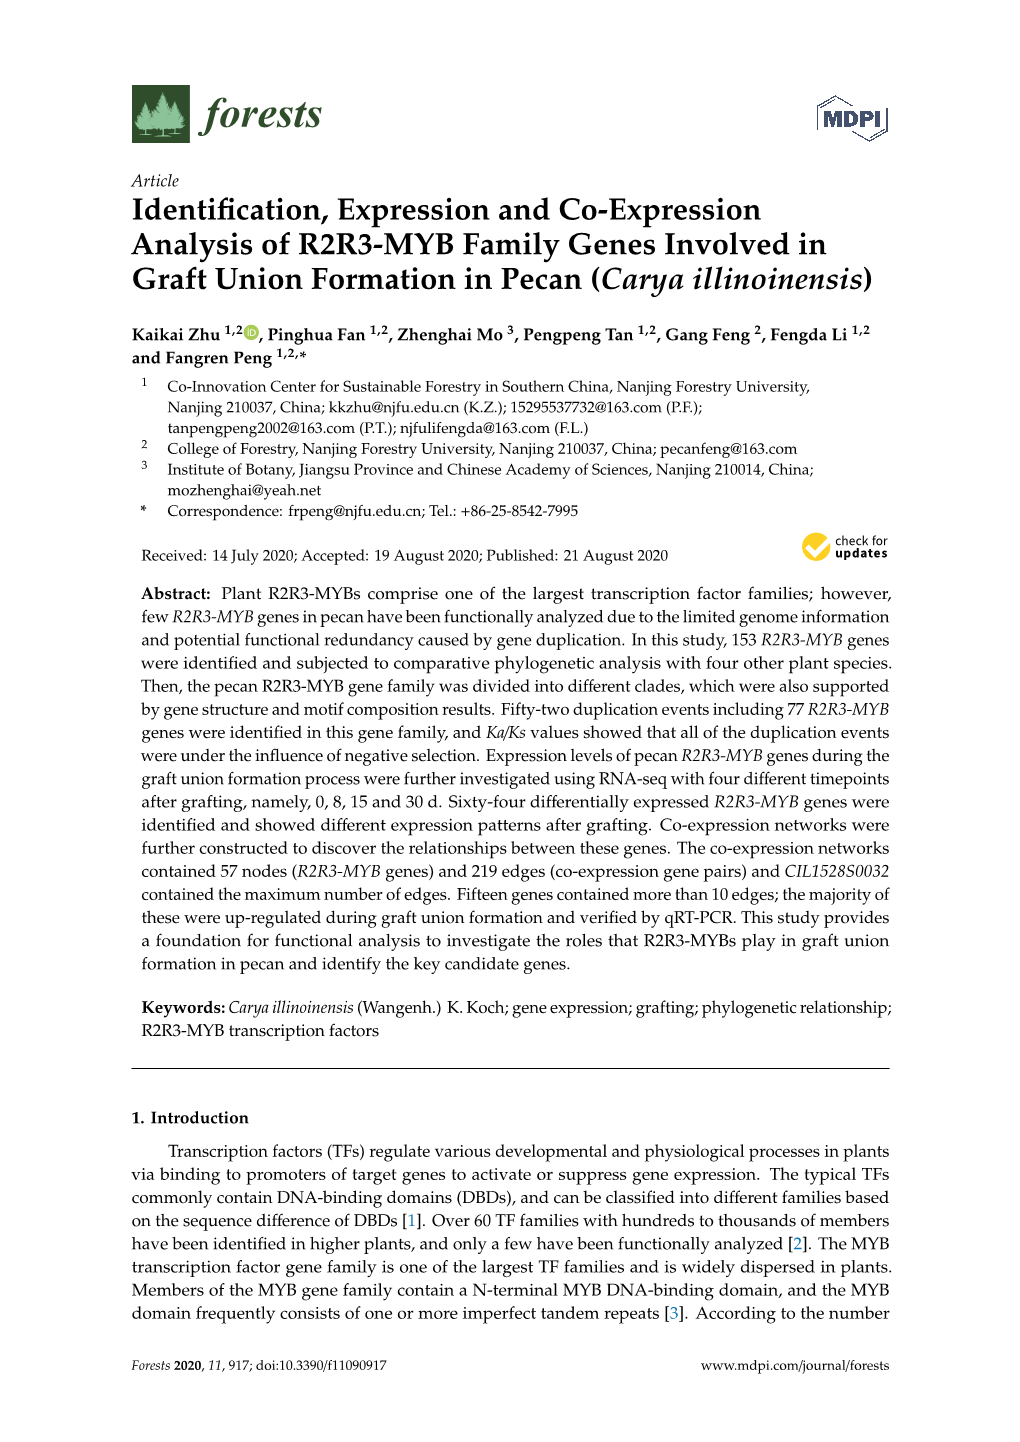 Identification, Expression and Co-Expression Analysis of R2R3-MYB Family Genes Involved in Graft Union Formation in Pecan